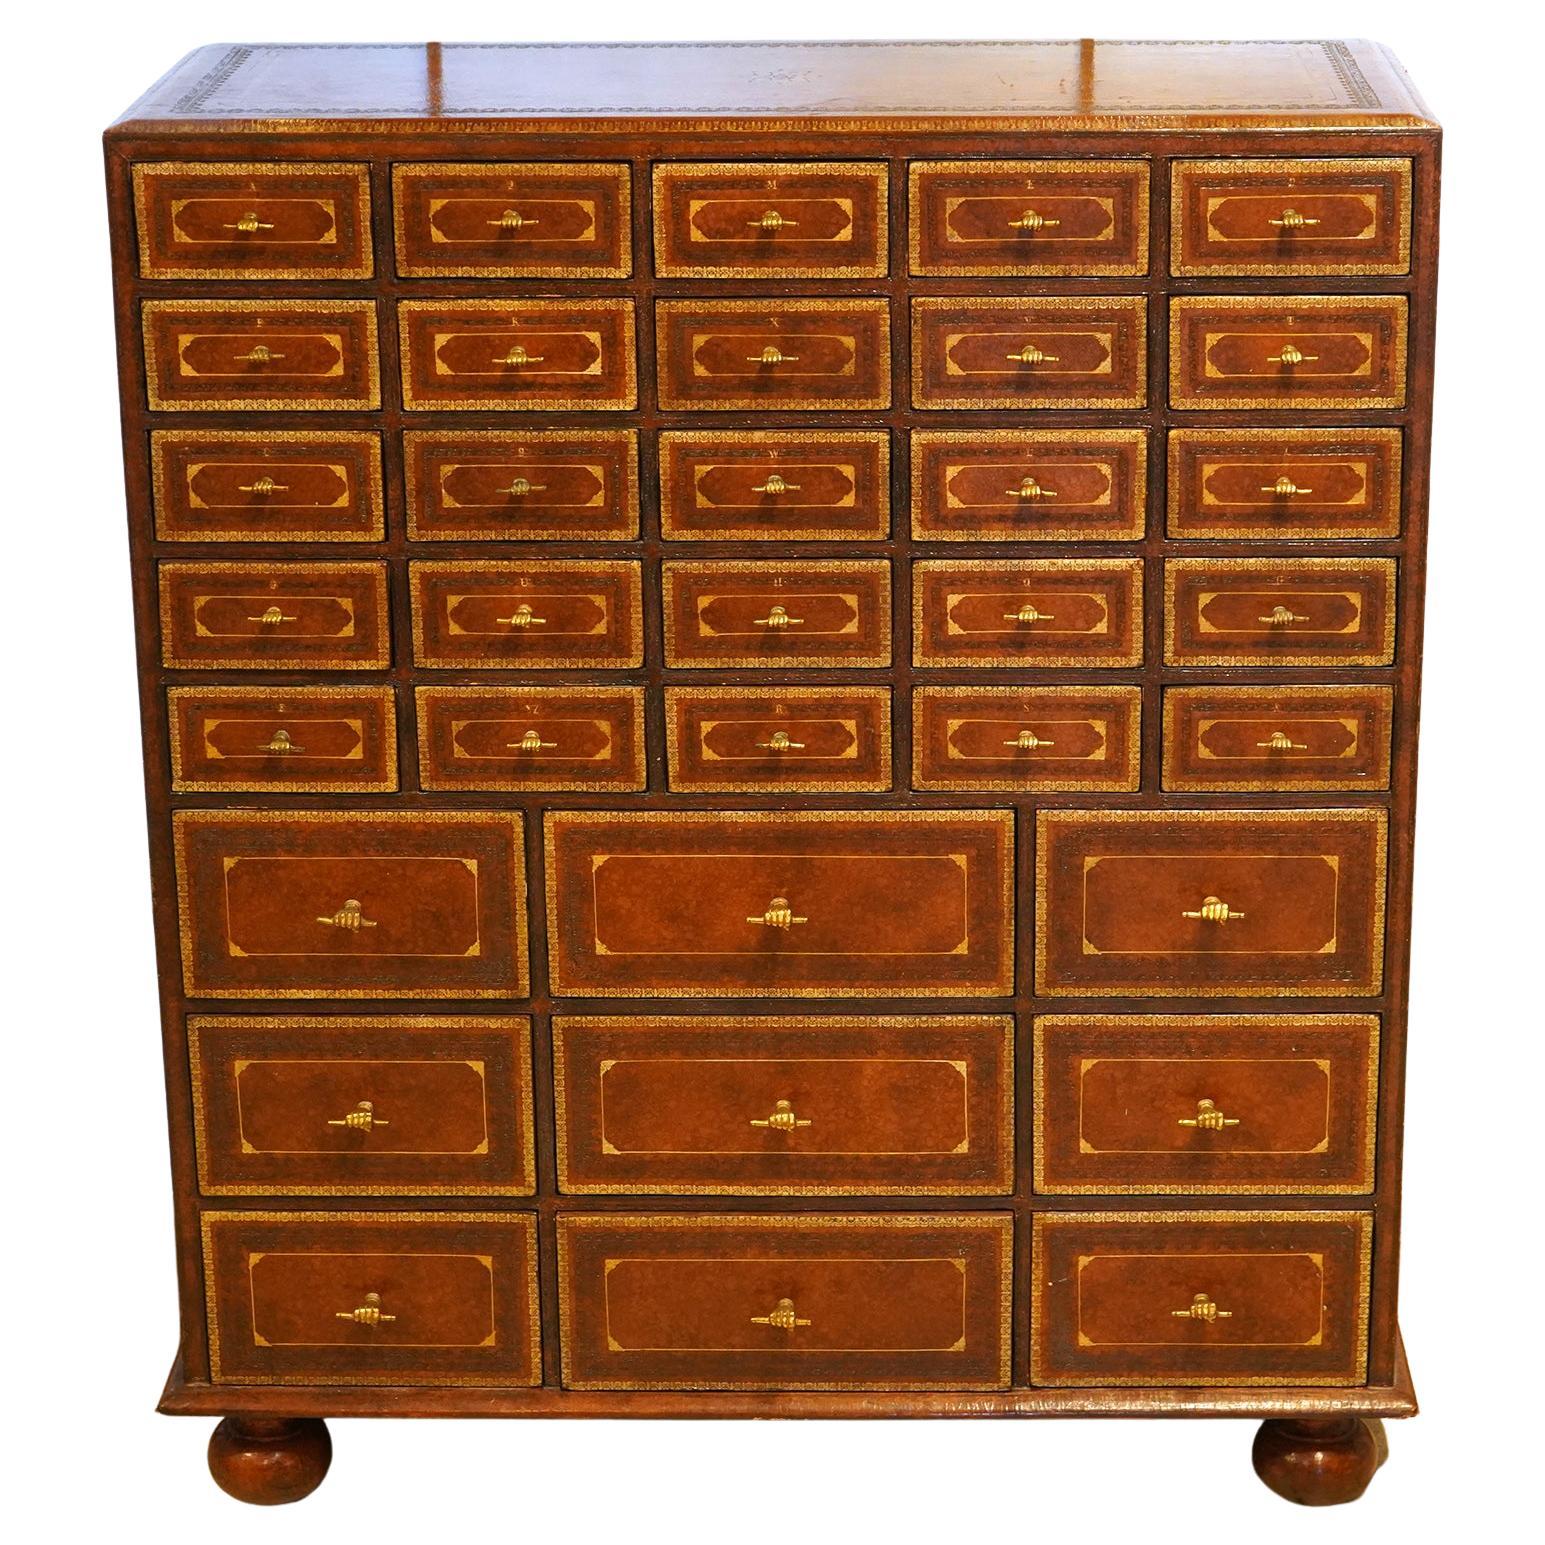 Unique Maitland Smith Tooled Leather 34 Drawer Chest of Drawers